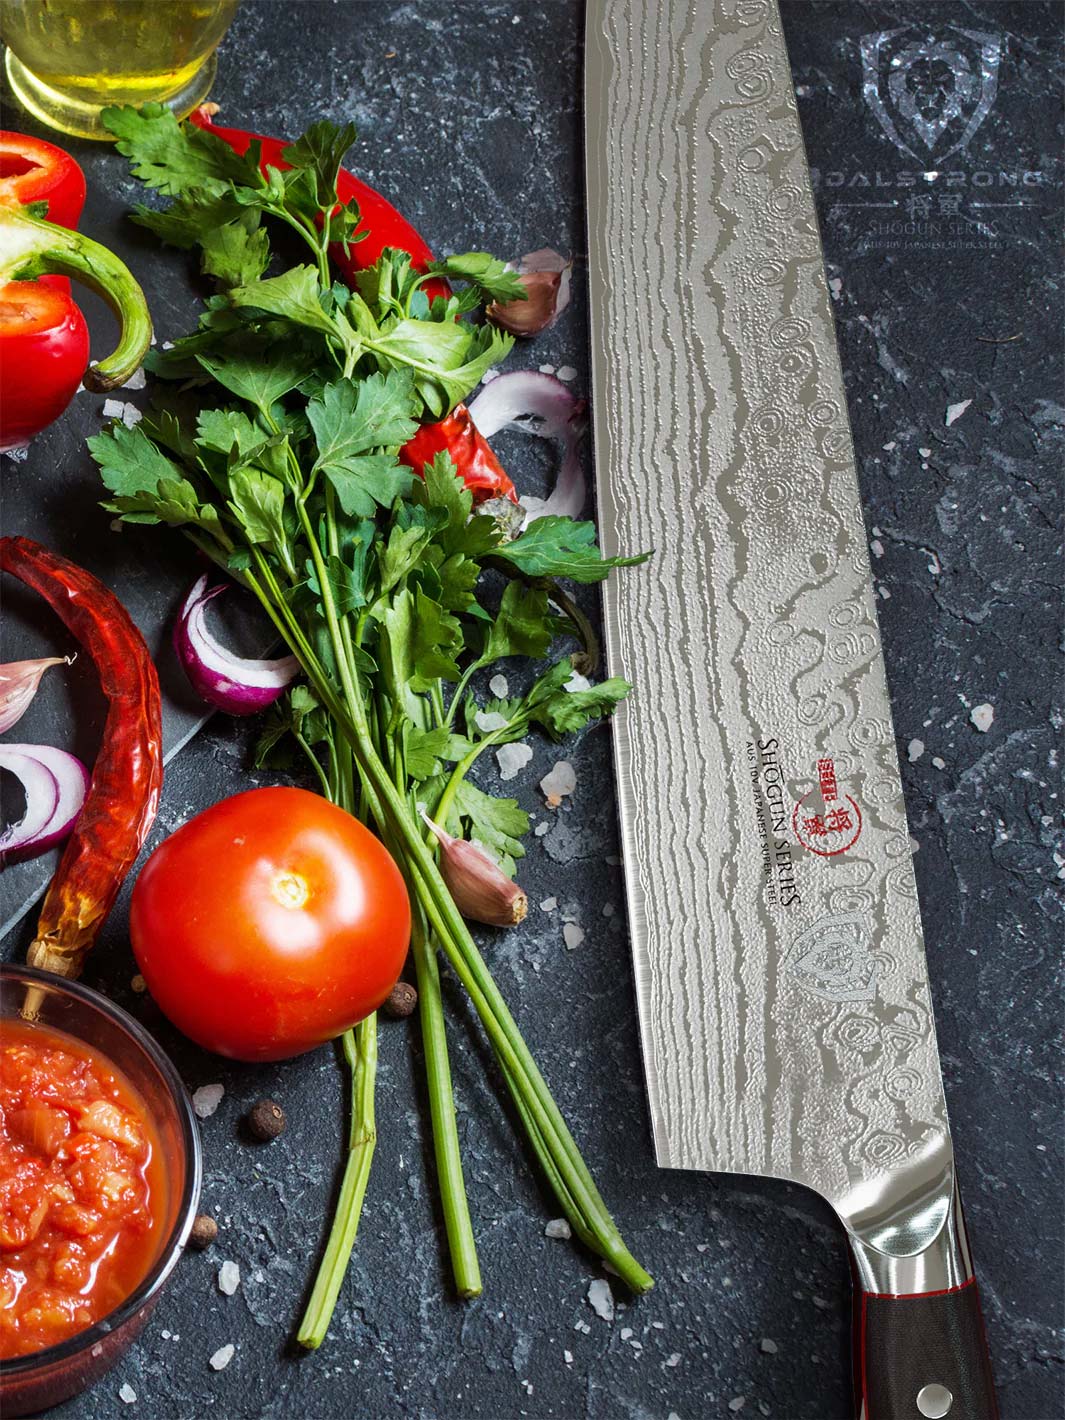 Dalstrong shogun series 12 inch chef knife with black handle beside some herbs.